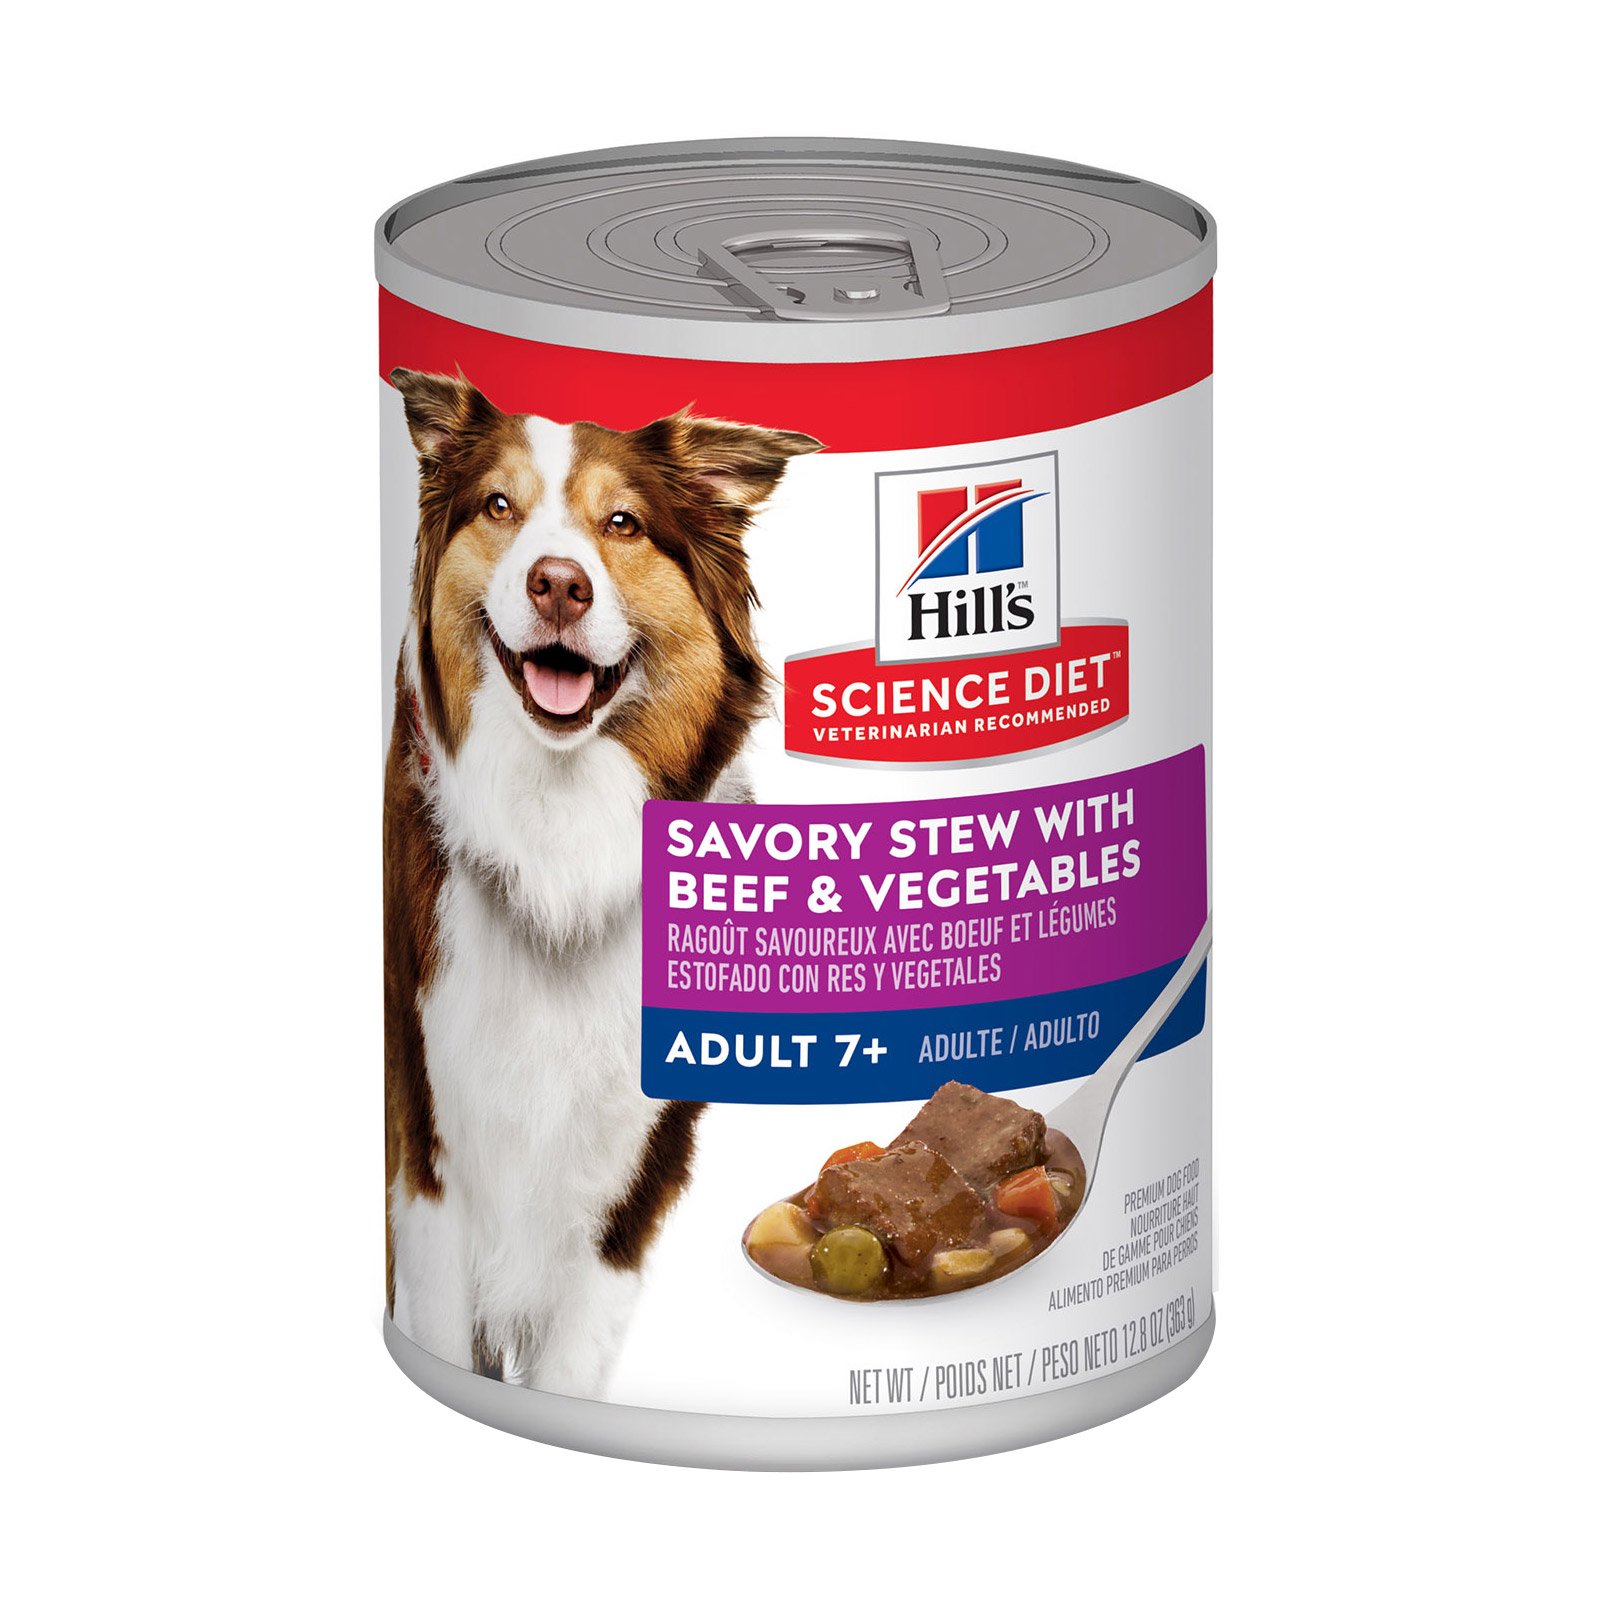 Hill's Science Diet Adult 7+ Savory Stew Beef & Vegetable Canned Dog Food